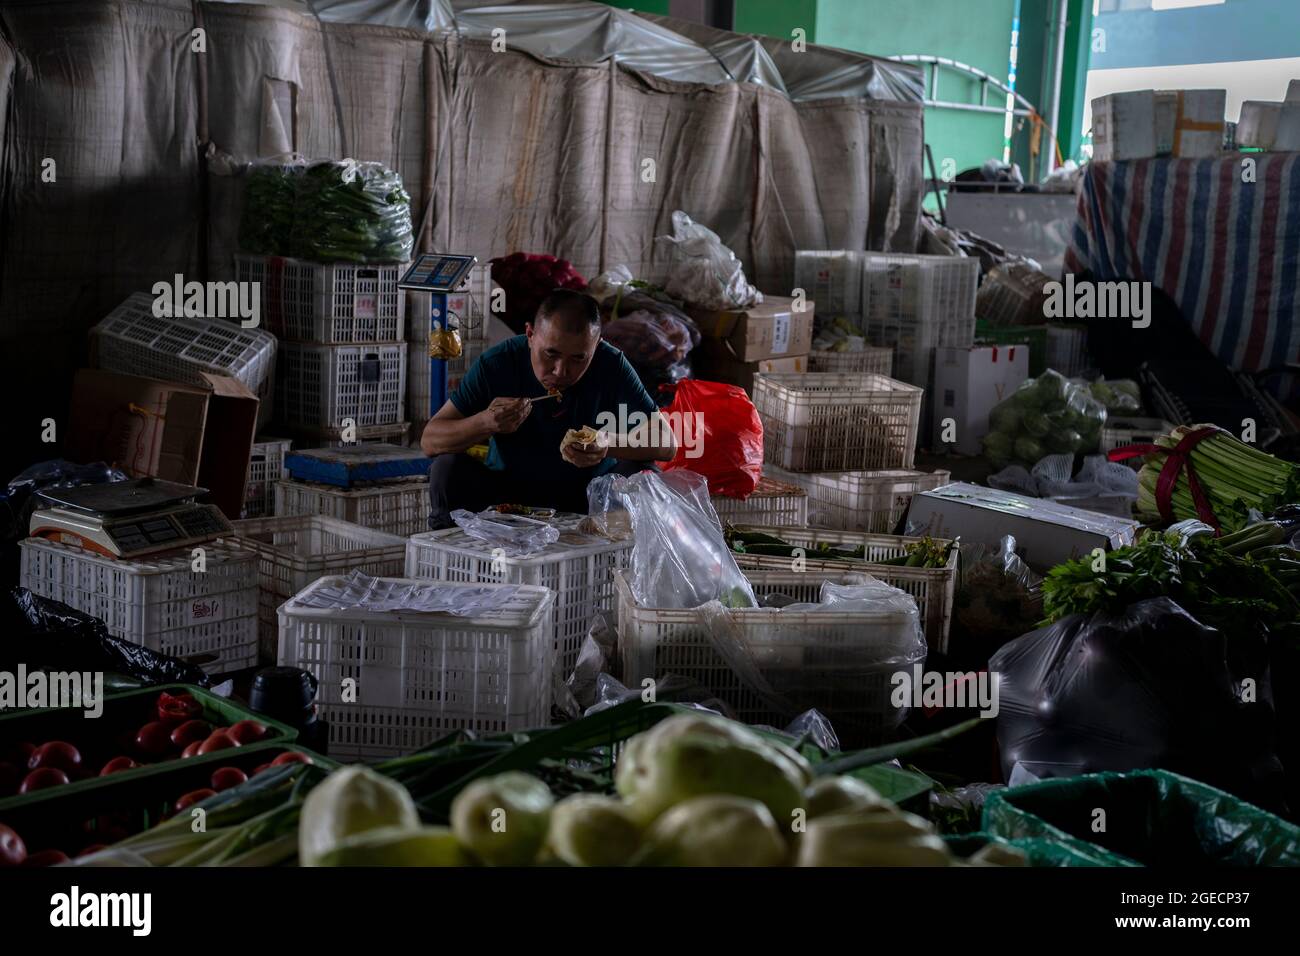 a vendor have lunch on his stall in a produce market. Stock Photo